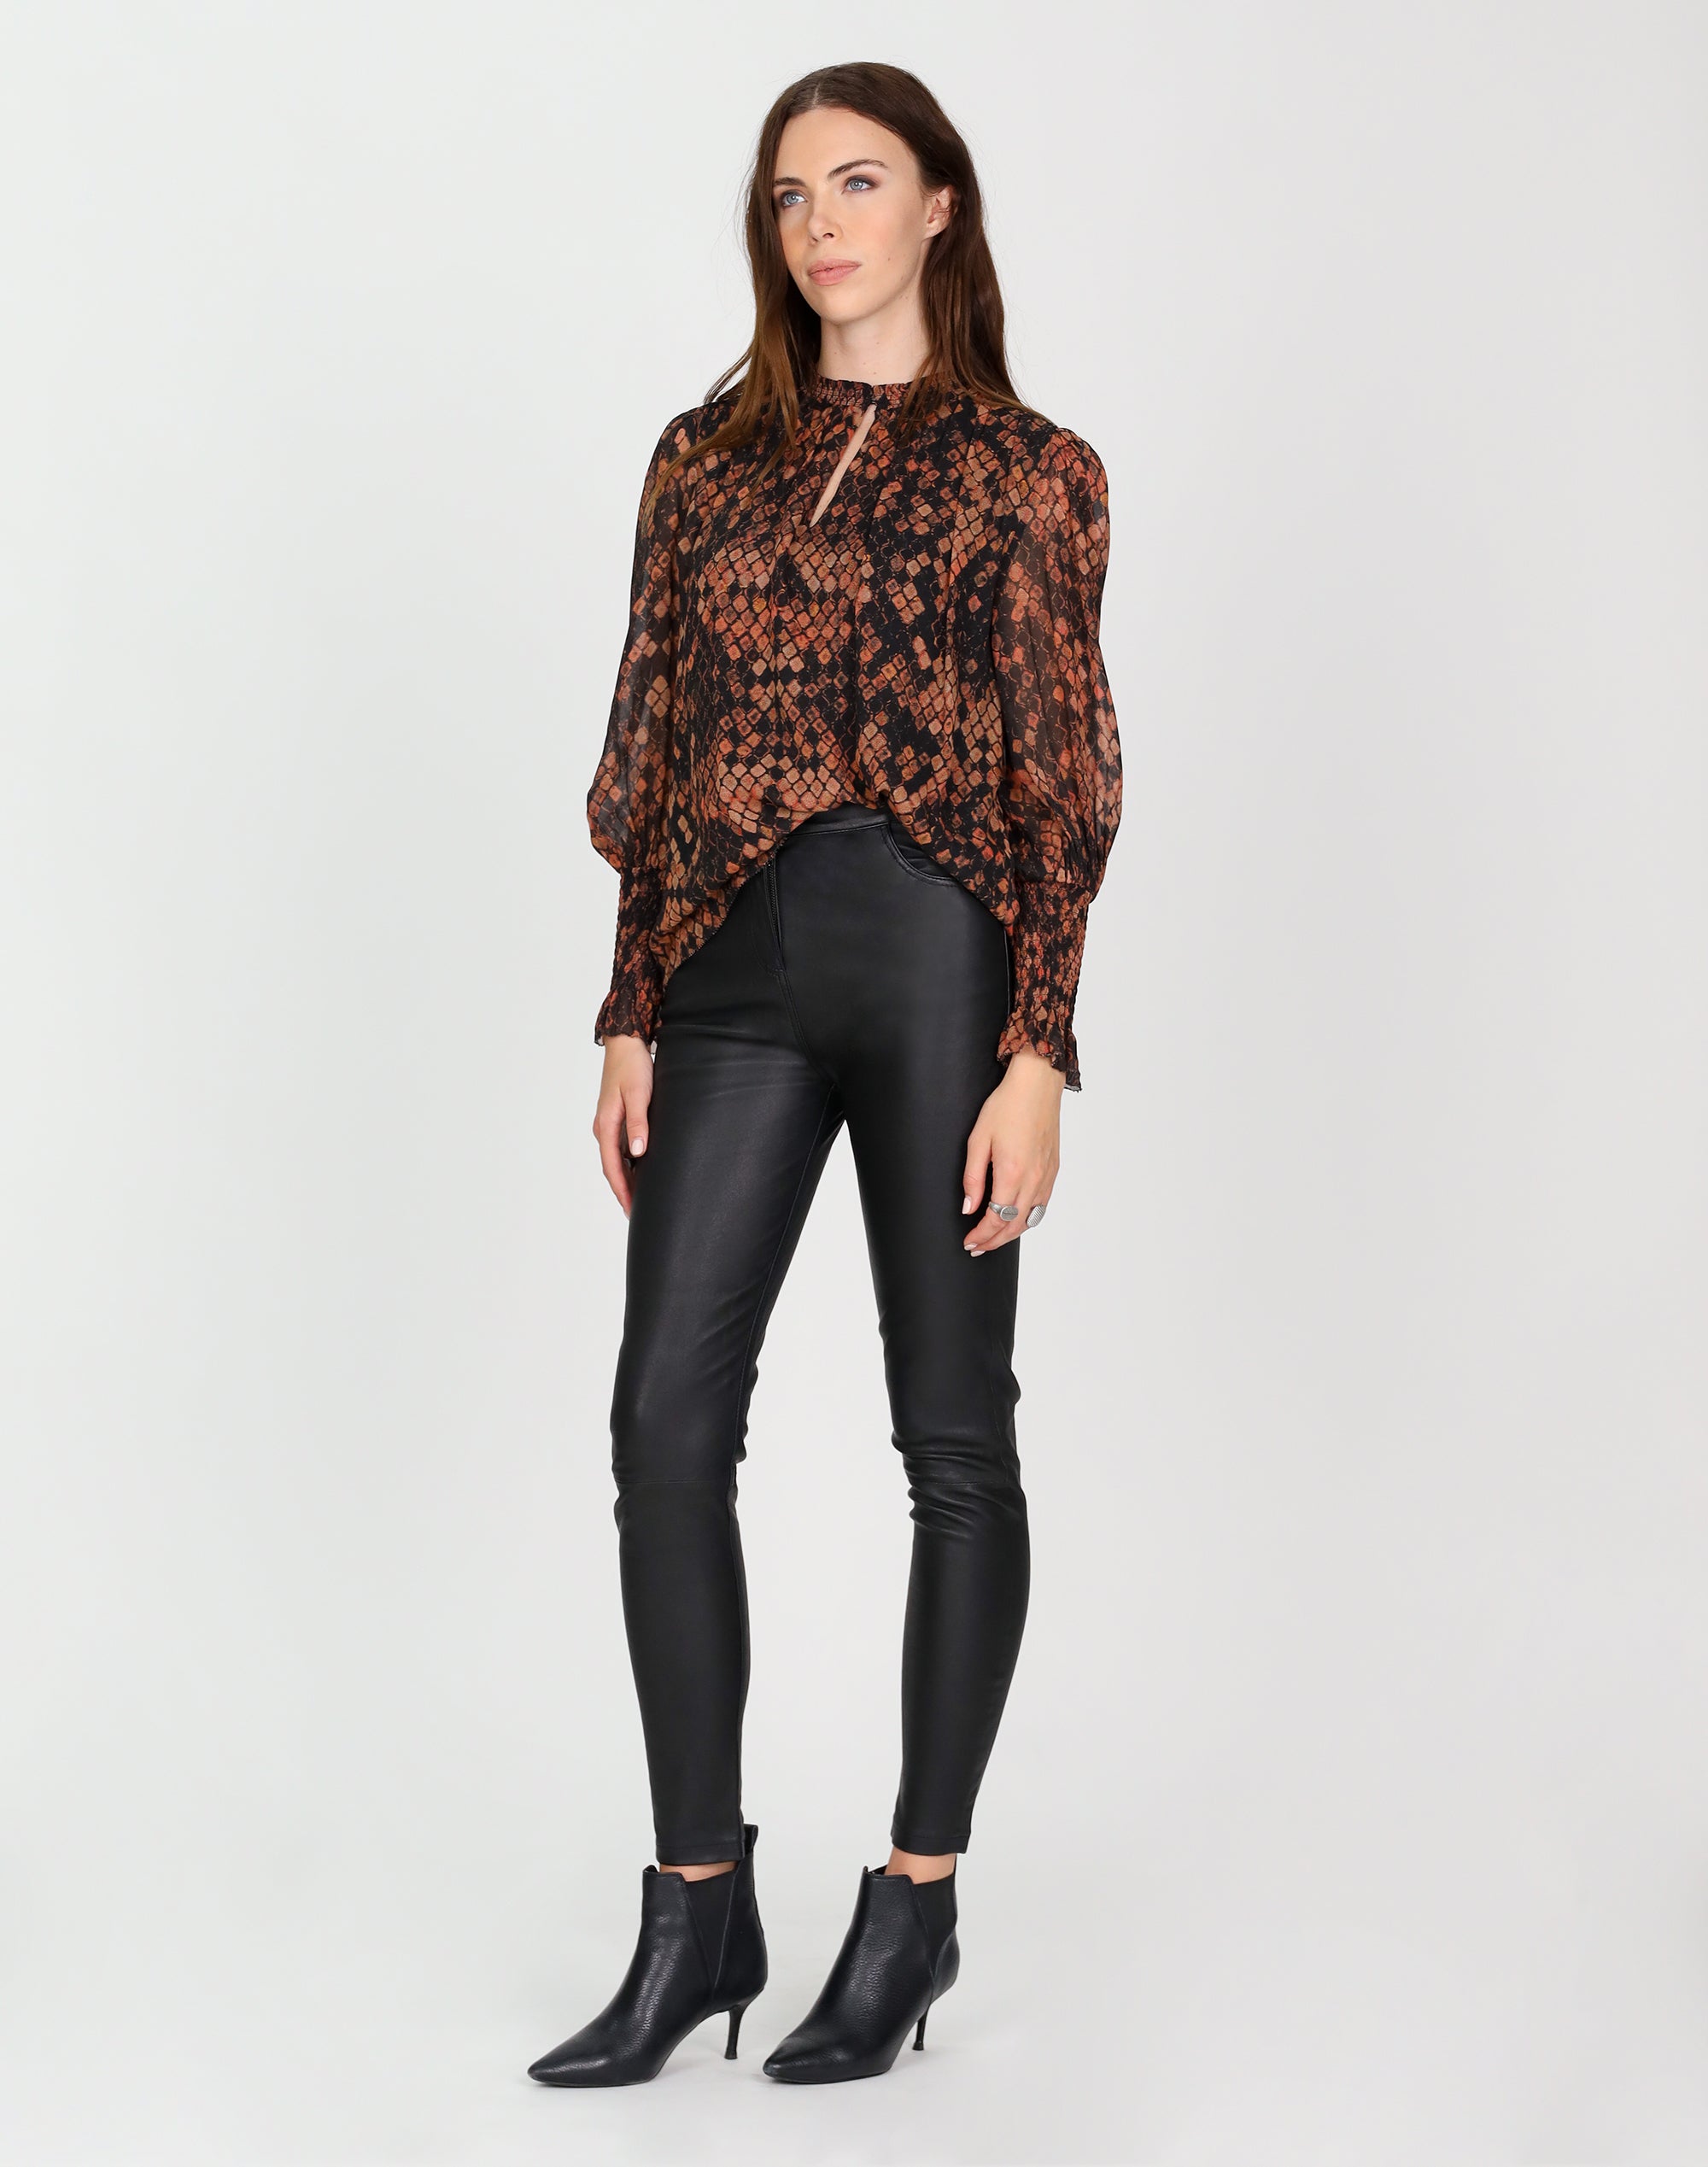 Stretch Leather Pant